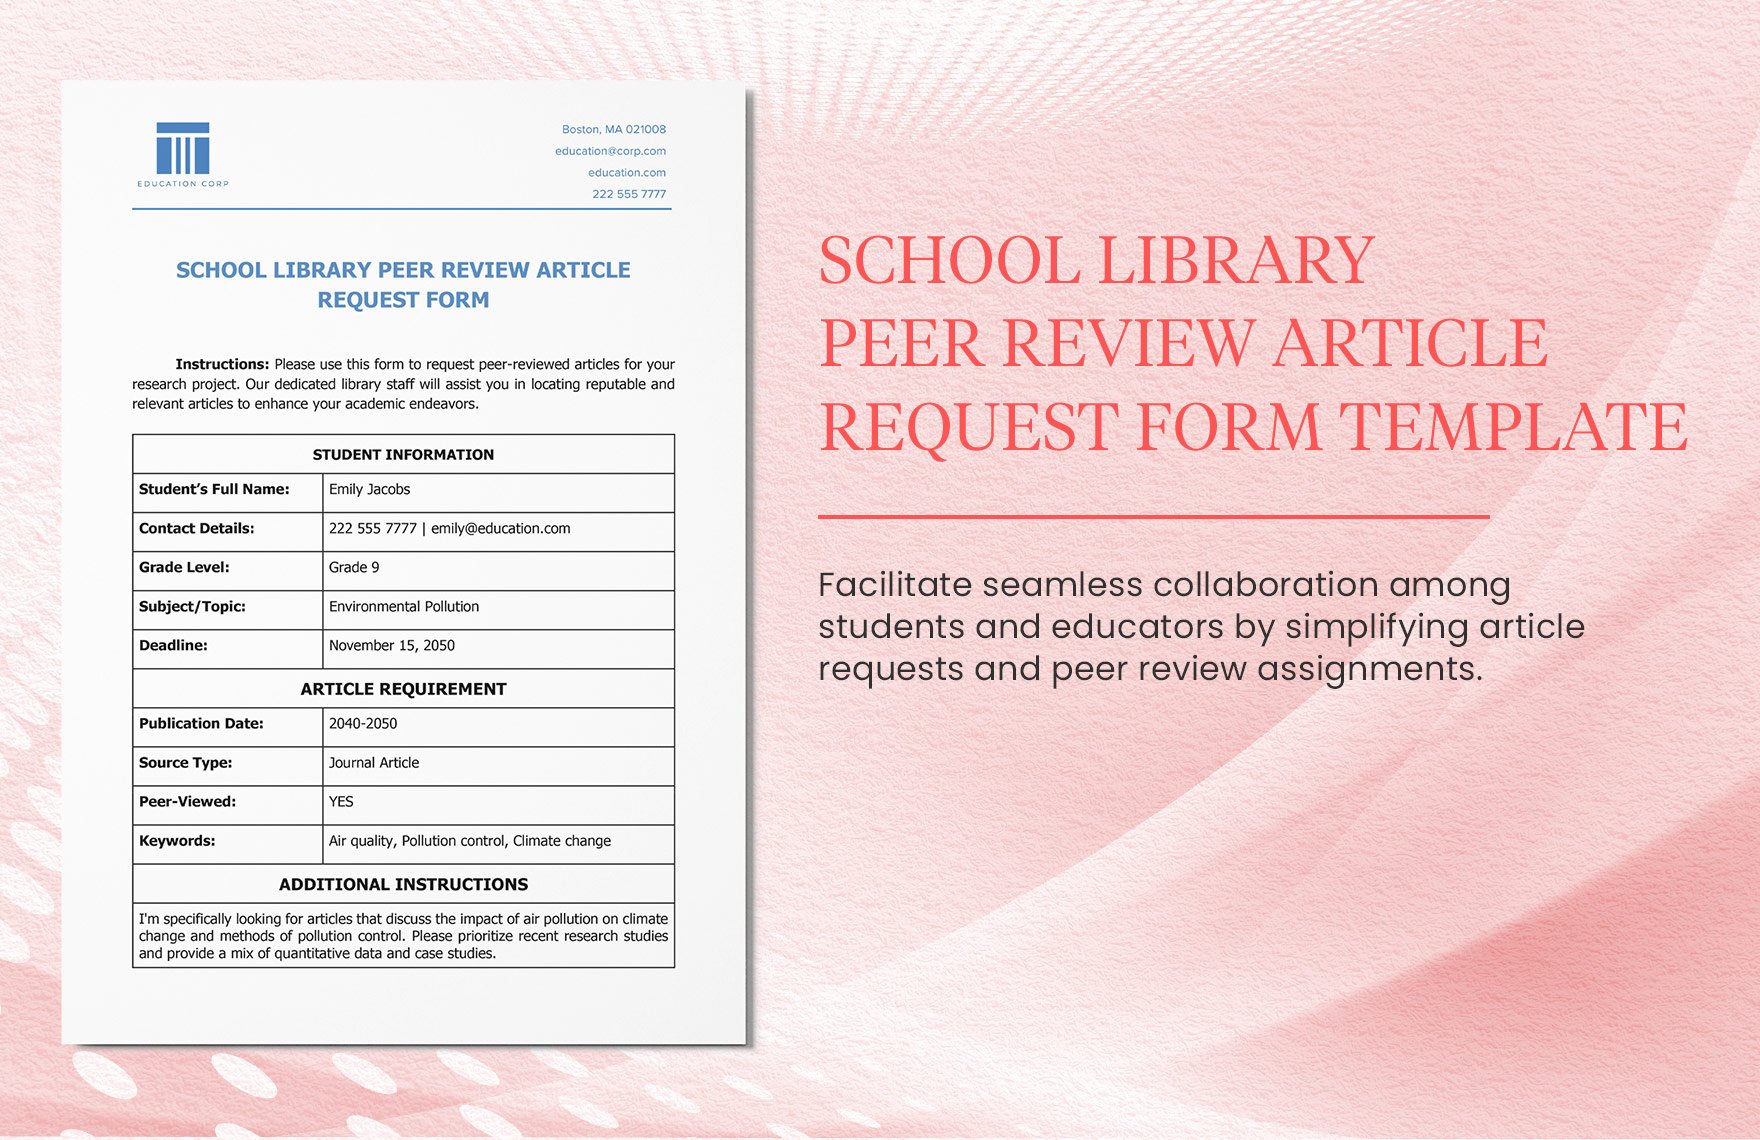 School Library Peer Review Article Request Form Template